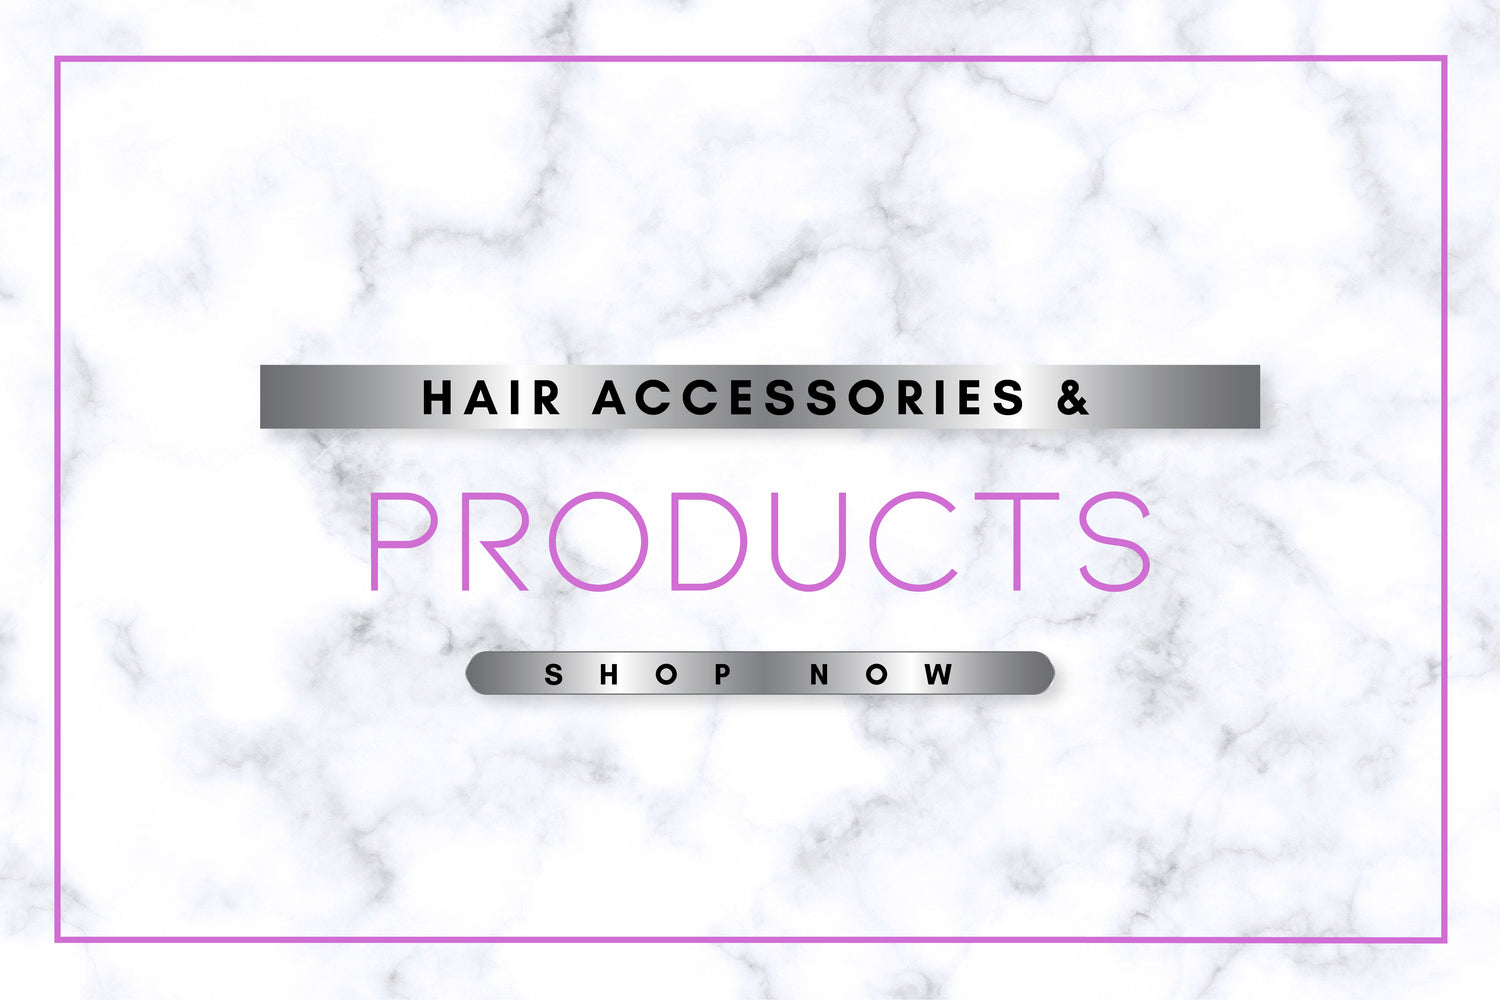 Hair Accessories & Products